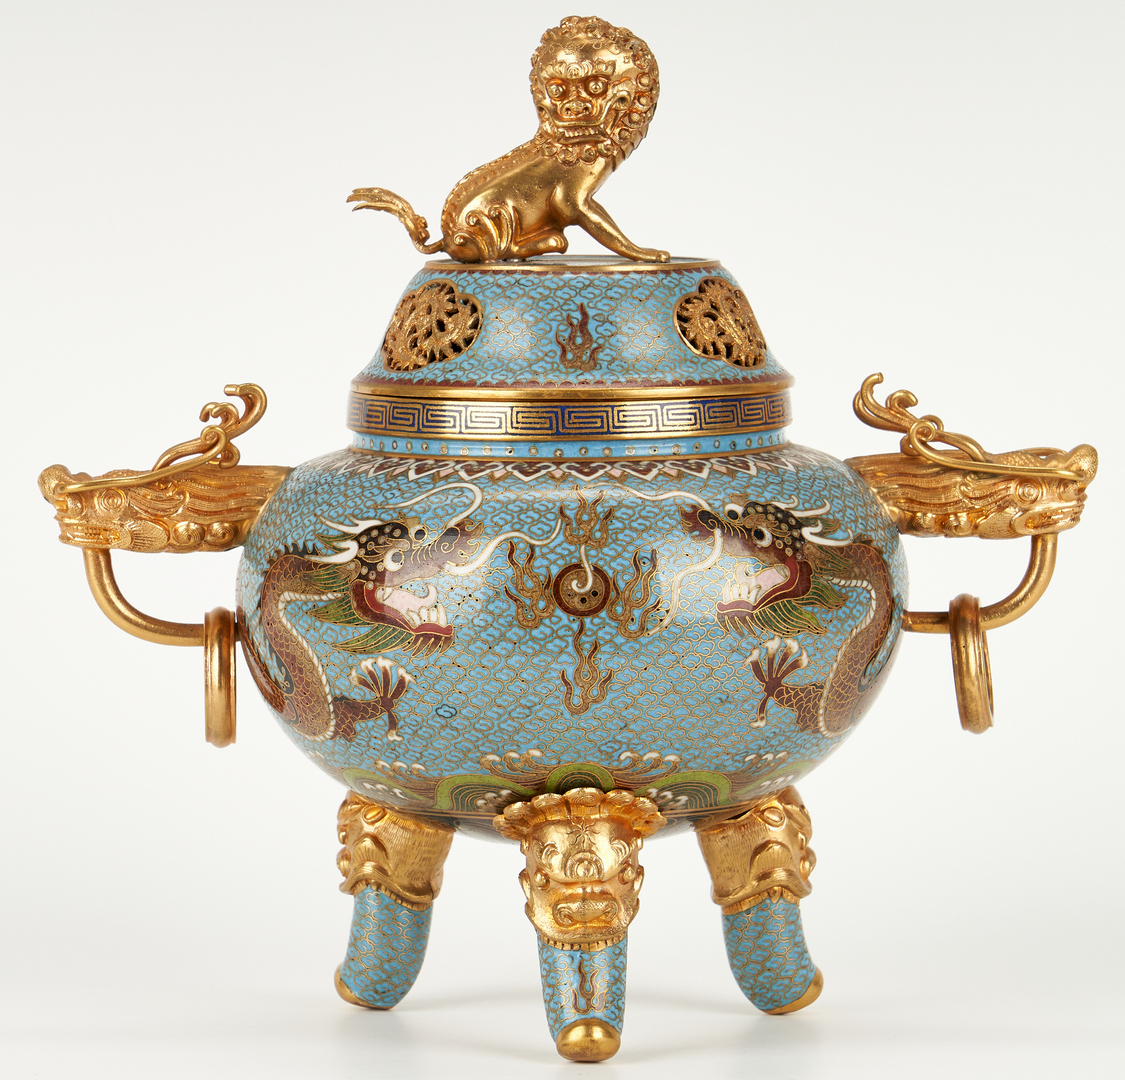 Lot 9: Asian Cloisonne Censer and Plate, 2 items